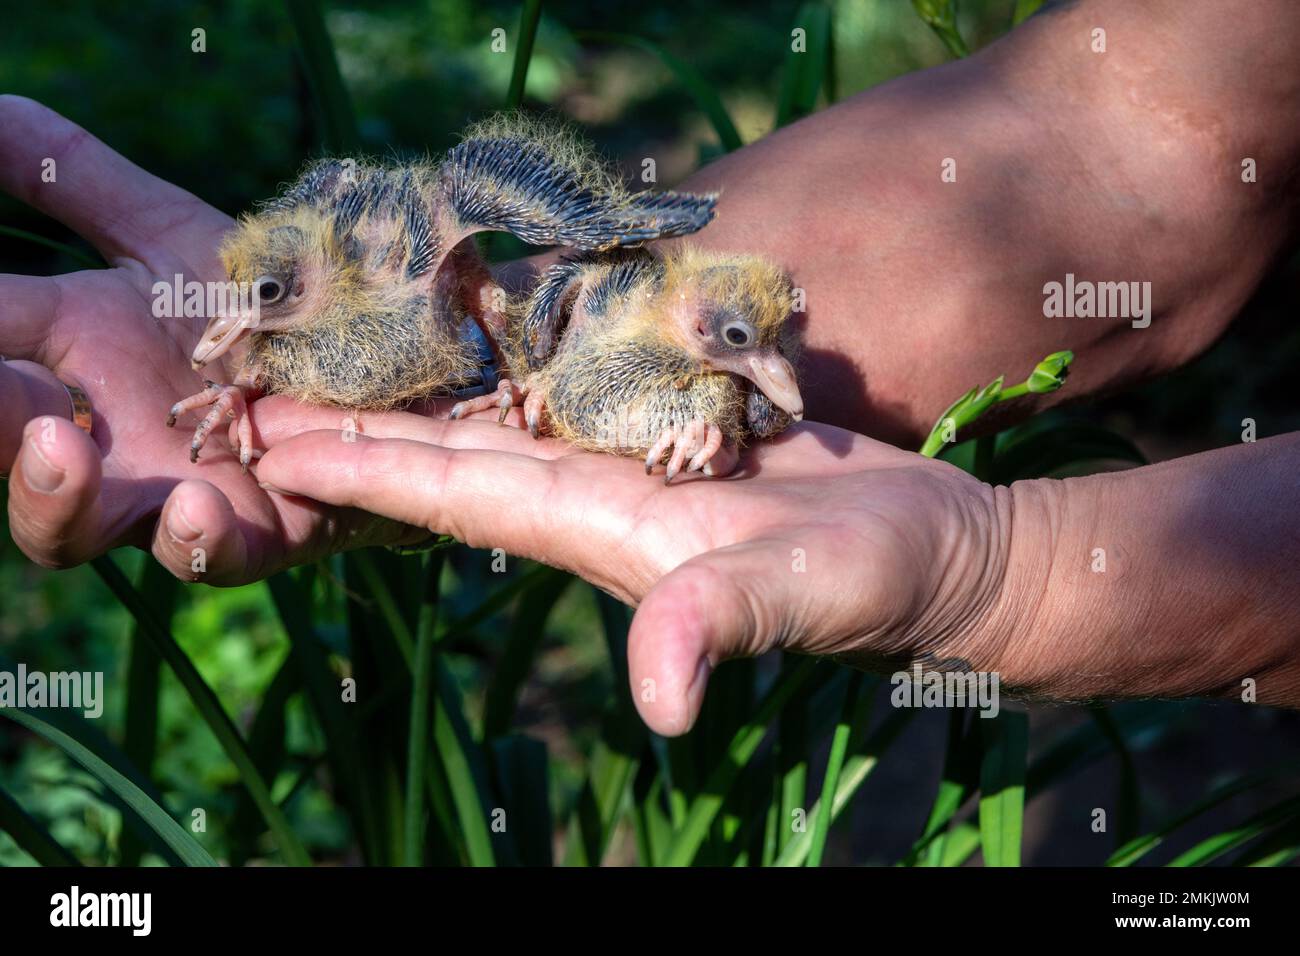 Two small pigeon Chicks sit on the hand. Breeding of domestic pedigreed pigeons Stock Photo